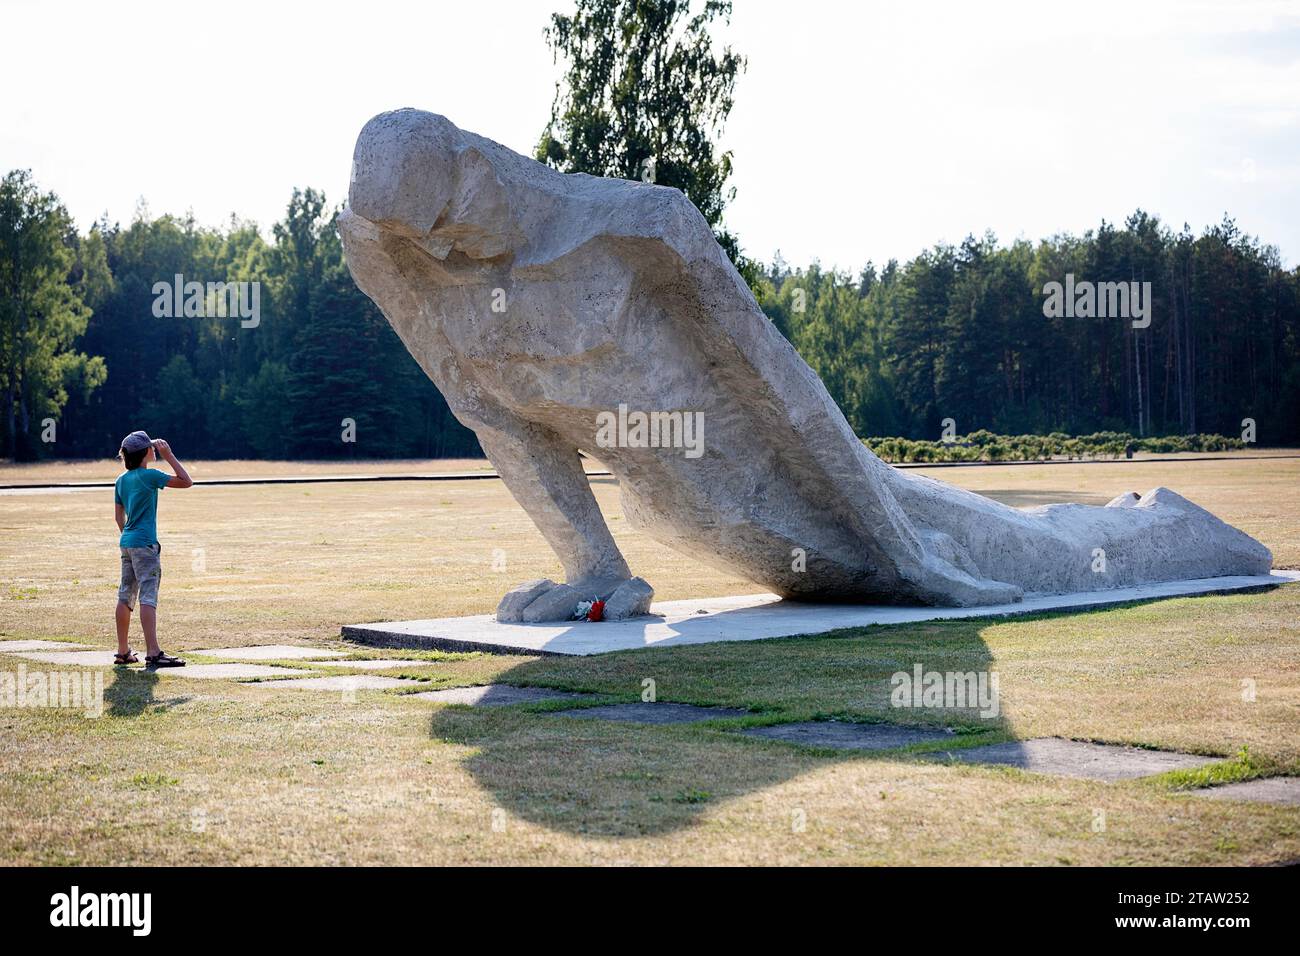 Tourist looking at the giant sculpture at Salaspils Memorial, one of Europe's largest monument complexes commemorating victims of Nazism, Latvia Stock Photo